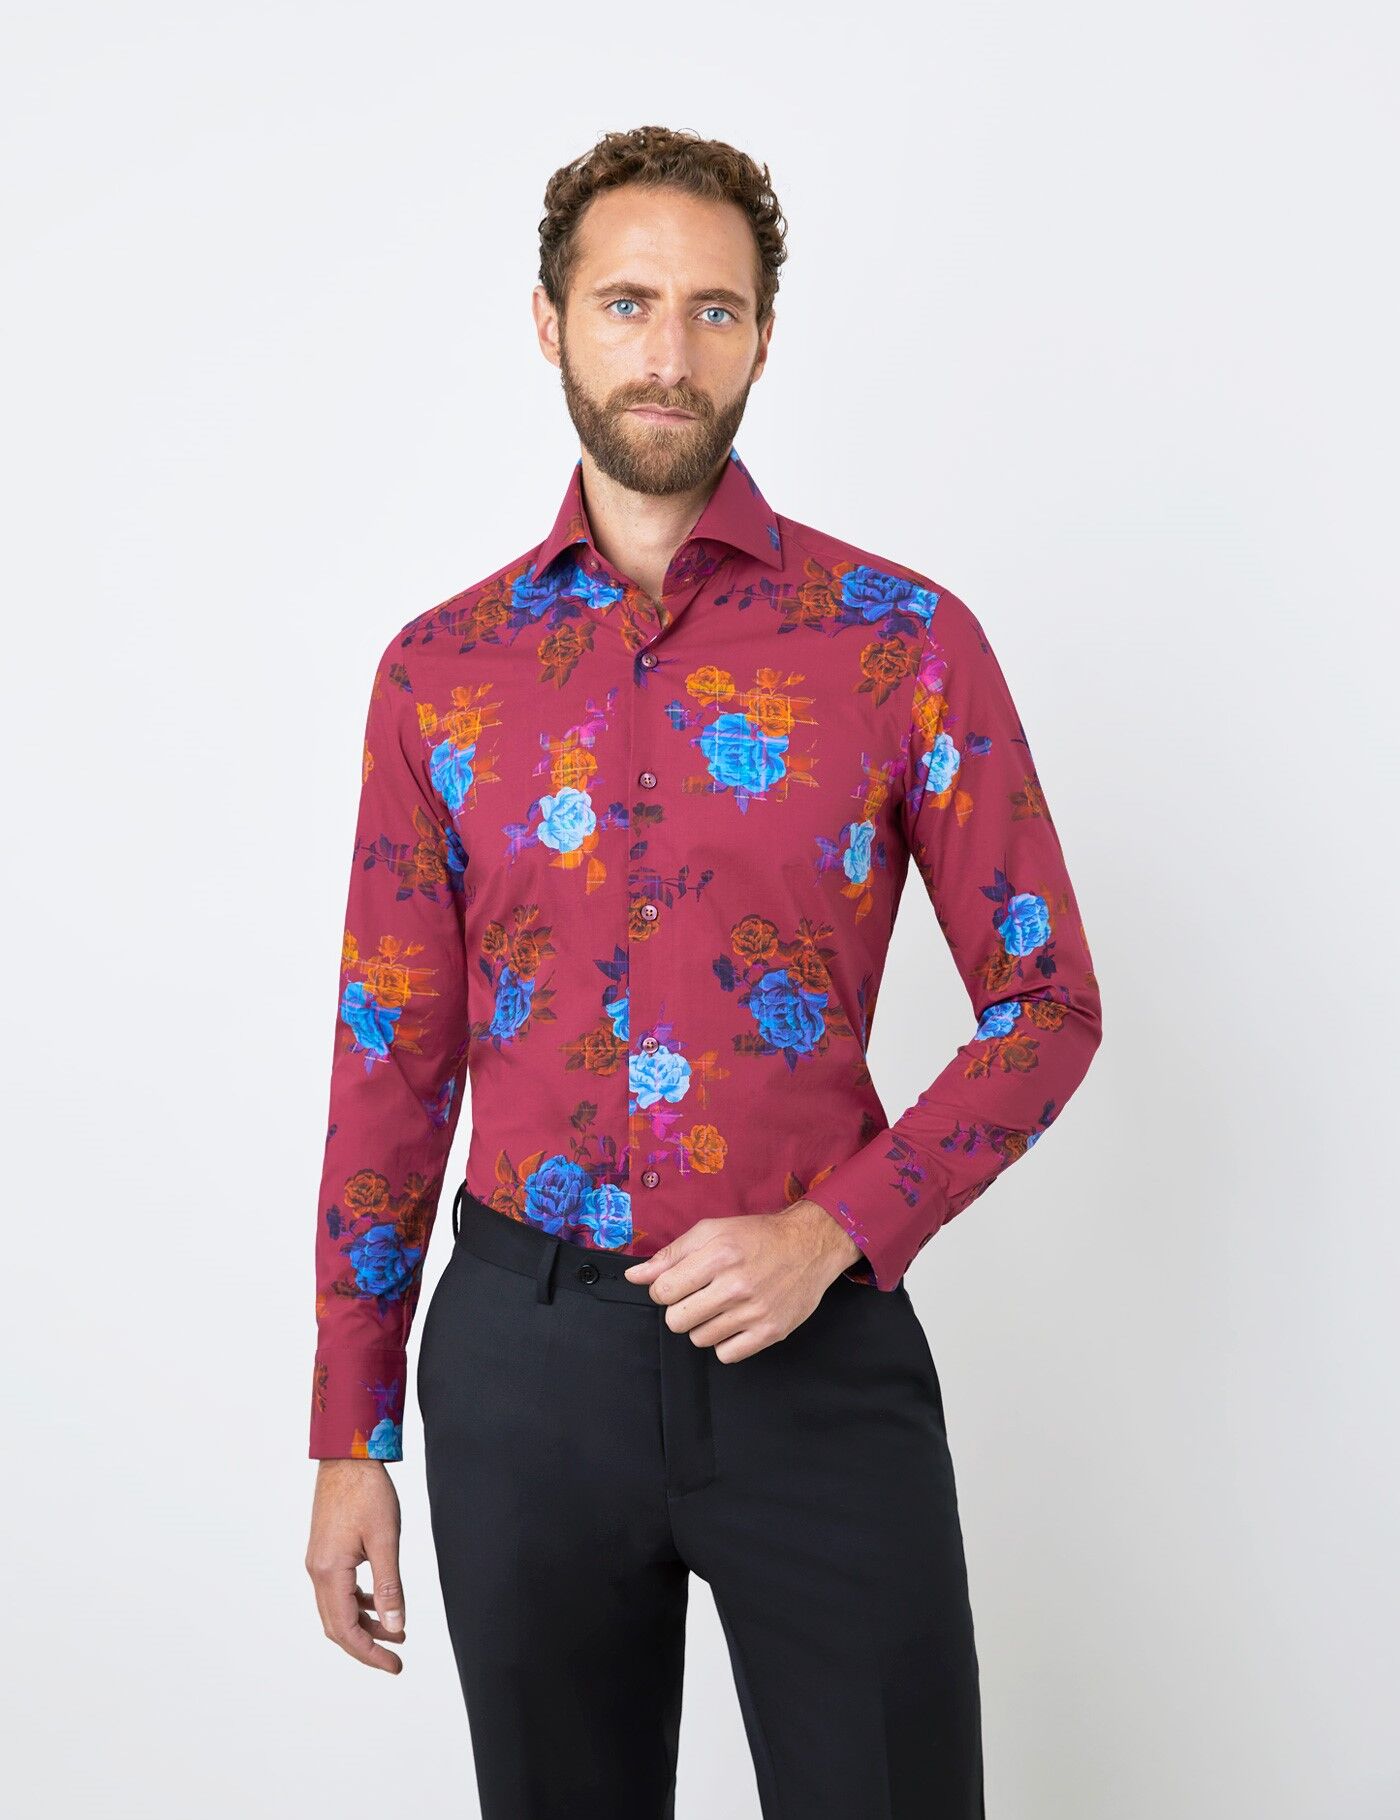 Hawes & Curtis Men's Roses Print Relaxed Slim Fit Shirt in Burgundy   3X-Large   High Collar   Single Cuff   Hawes & Curtis